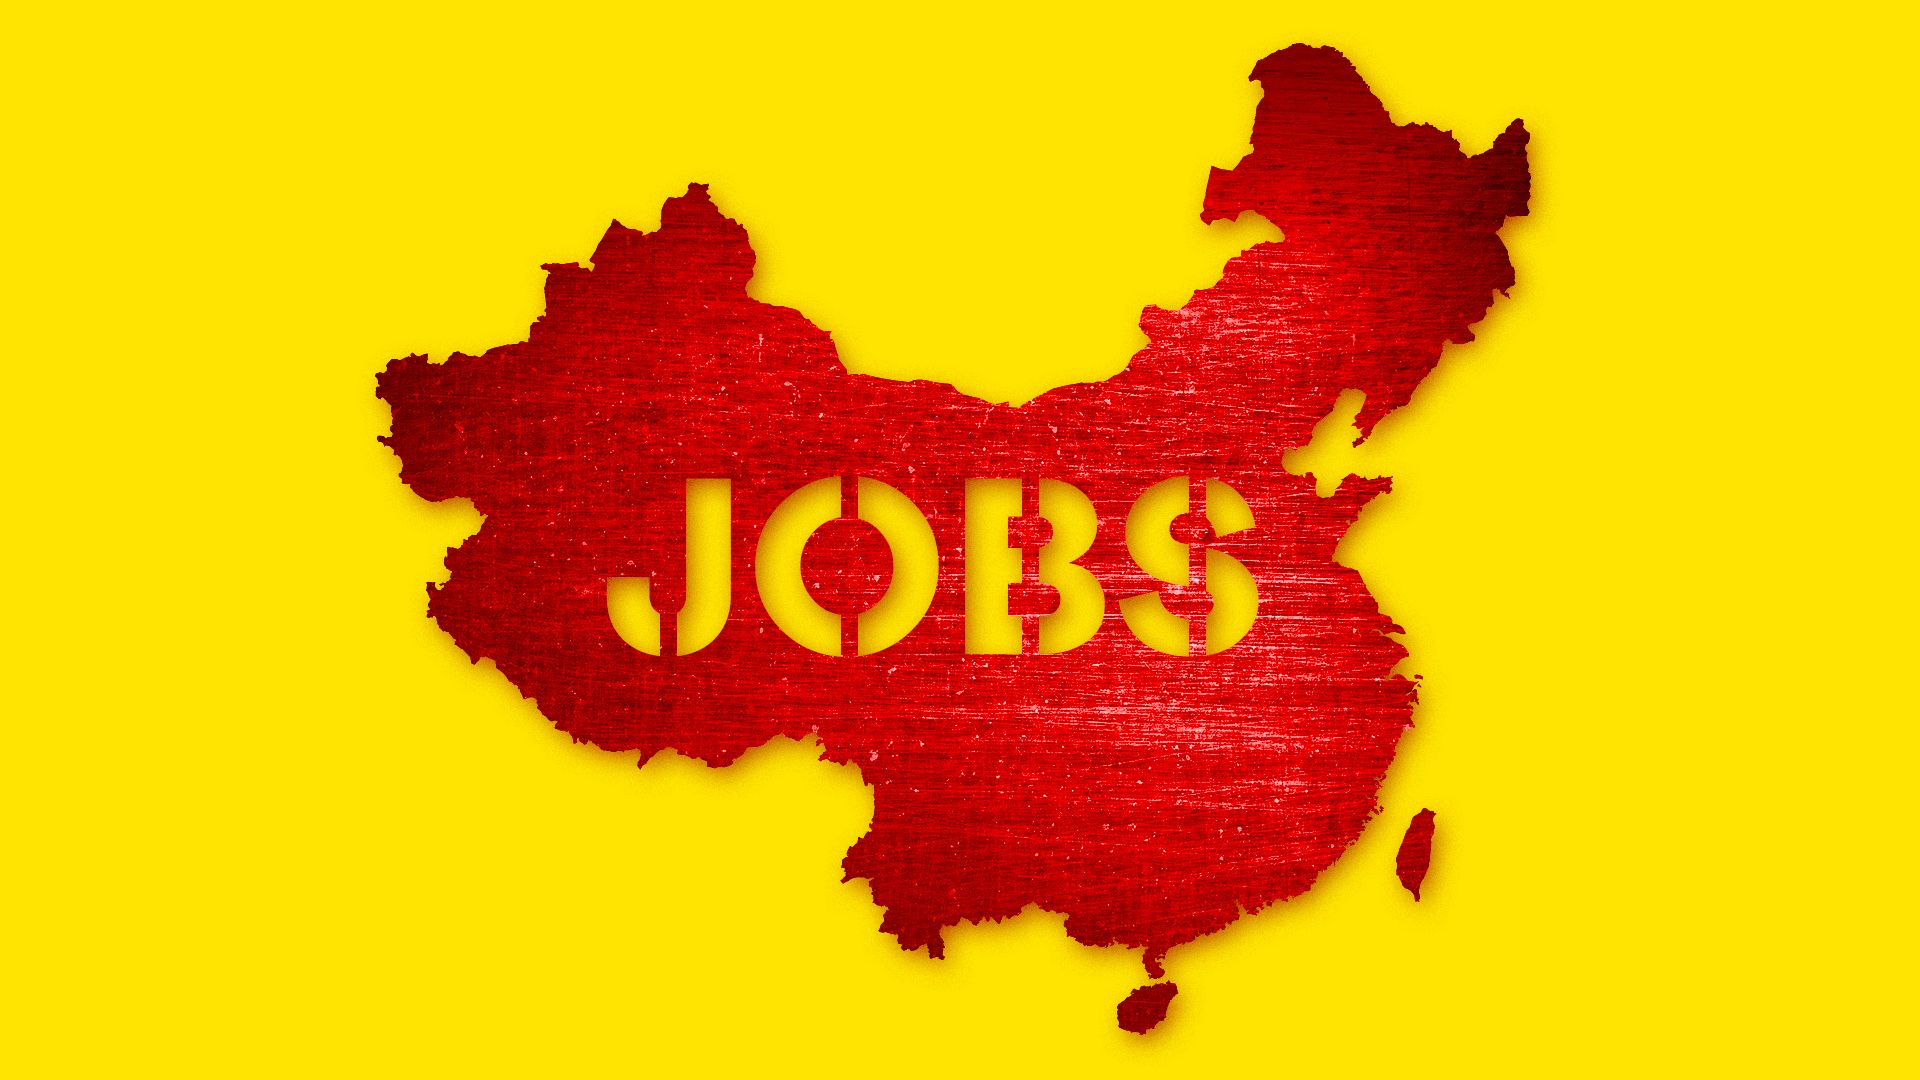 Illustration of a red map of China with yellow background and the word JOBS printed on the country.